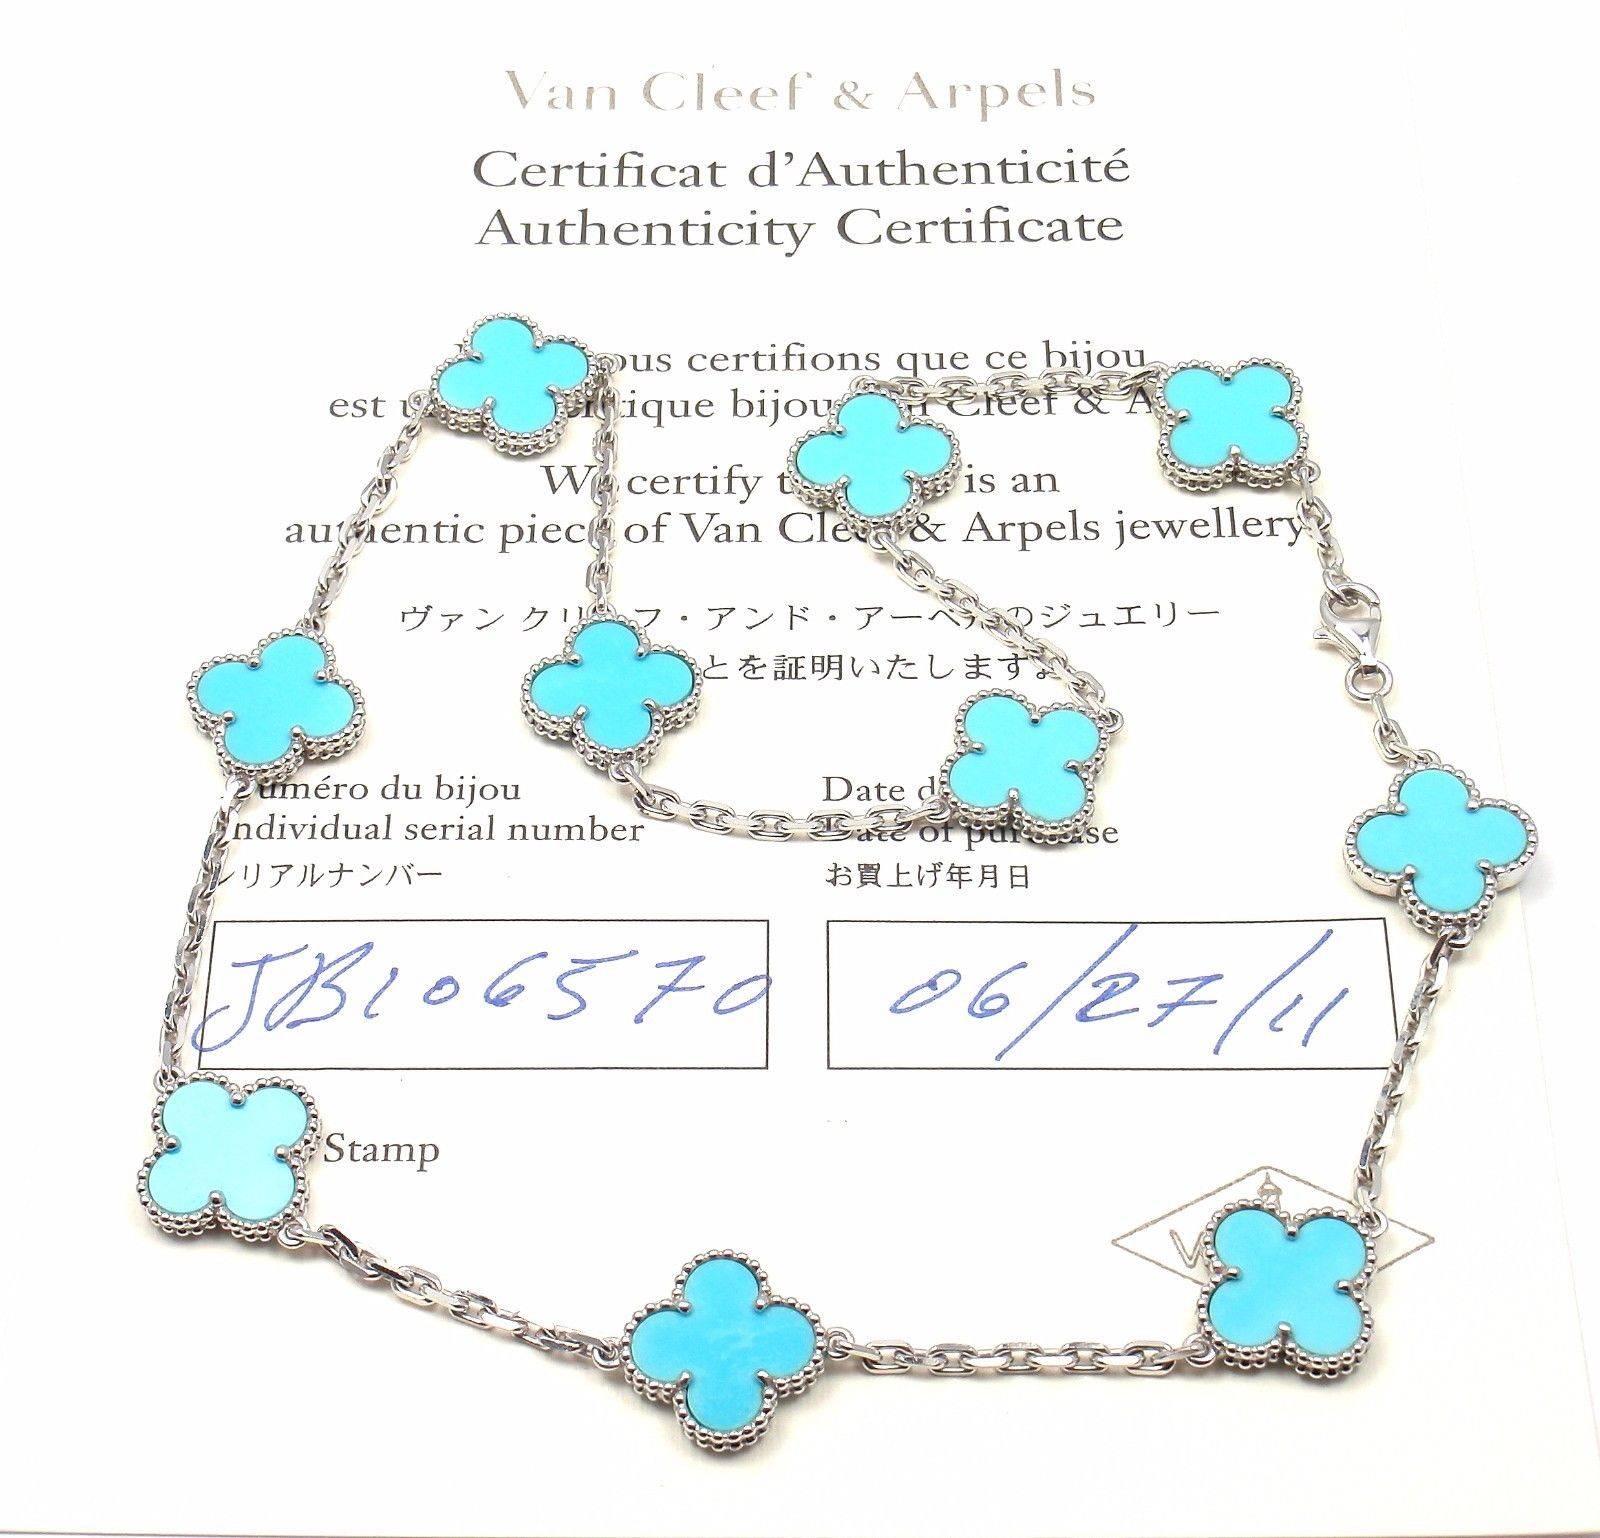 18k White Gold Alhambra 10 Motifs Turquoise Necklace by Van Cleef & Arpels. 
This necklace comes with VCA certificate.
With 10 motifs of turquoise alhambra stones 15mm each

Details: 
Length: 16.75"
Width: 15mm
Weight: 23.6 grams
Stamped